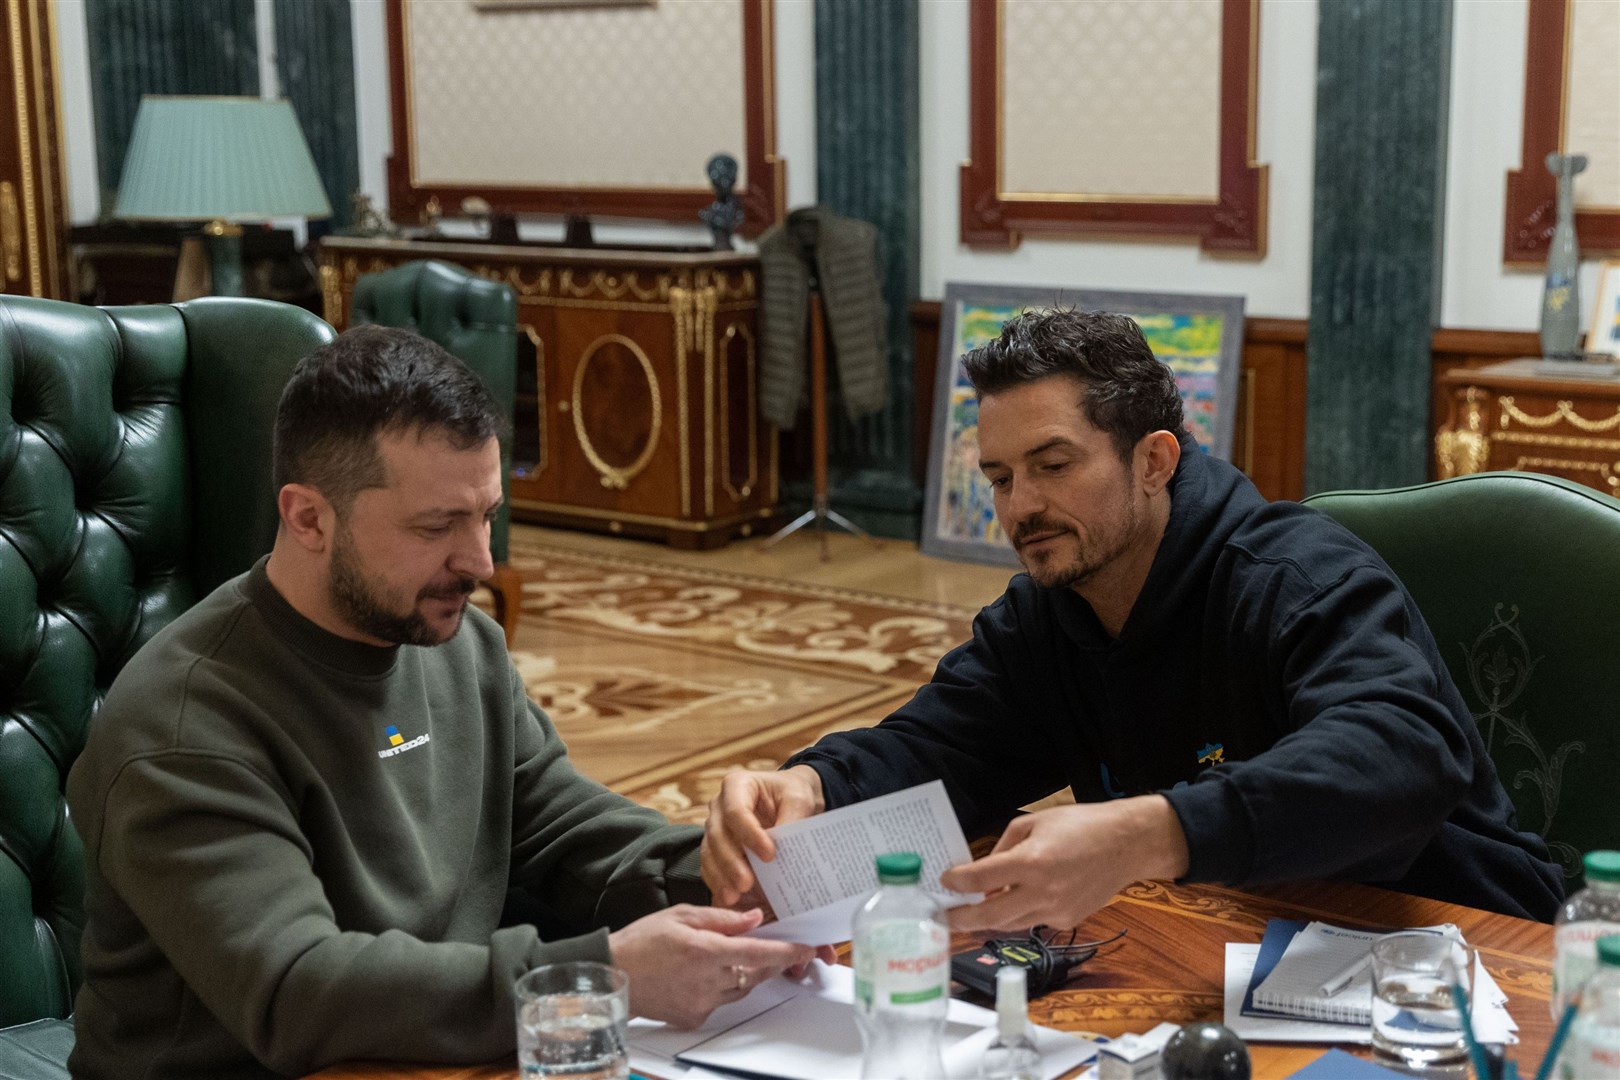 President Volodymyr Zelensky meeting Orlando Bloom in Kyiv during his visit to Ukraine for his work as a Unicef Goodwill Ambassador (Office of the President of Ukraine/PA)